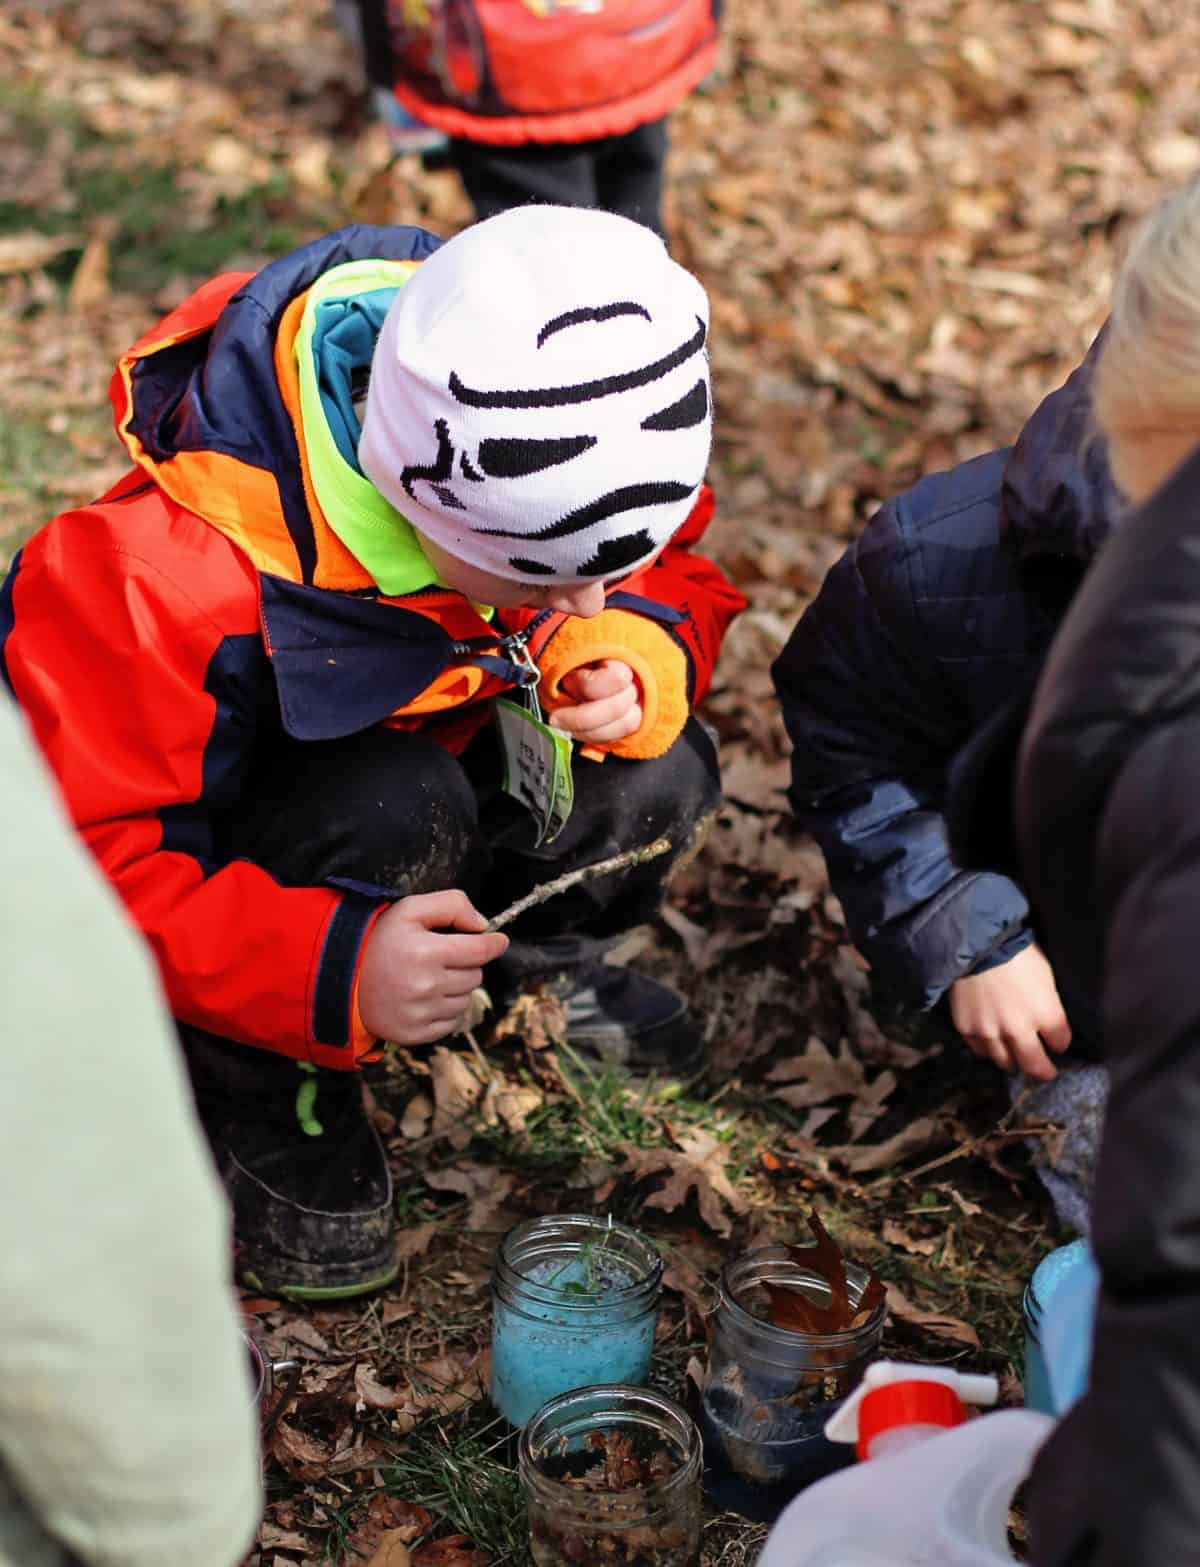 outdoor educational activities - making fairy potion